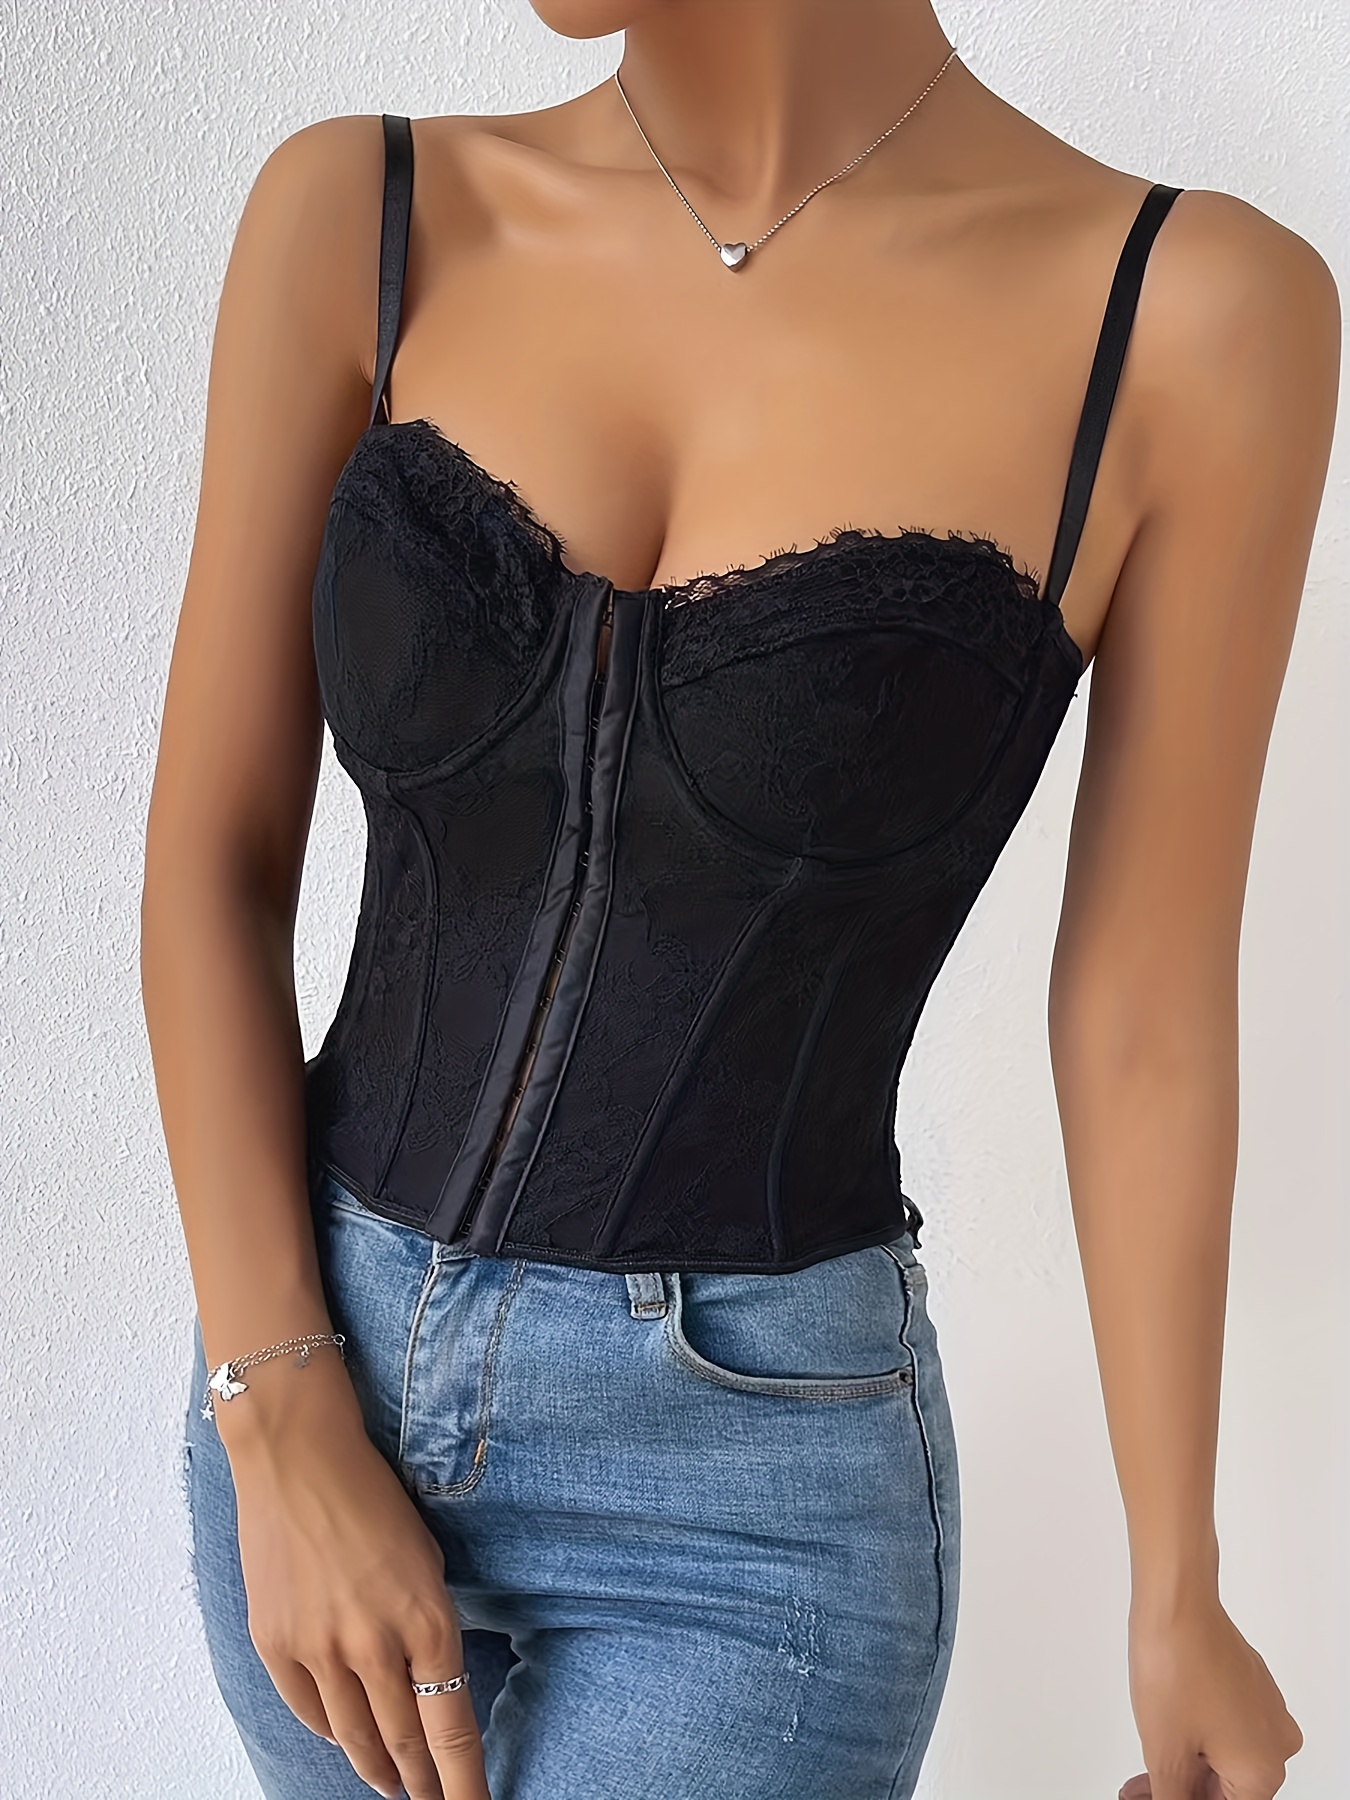 Comfy Corset, Comfy As A Cami But Sexy As A Corset! Combines a figure  flattering push up bra and a super comfortable bralette. SHOP HERE